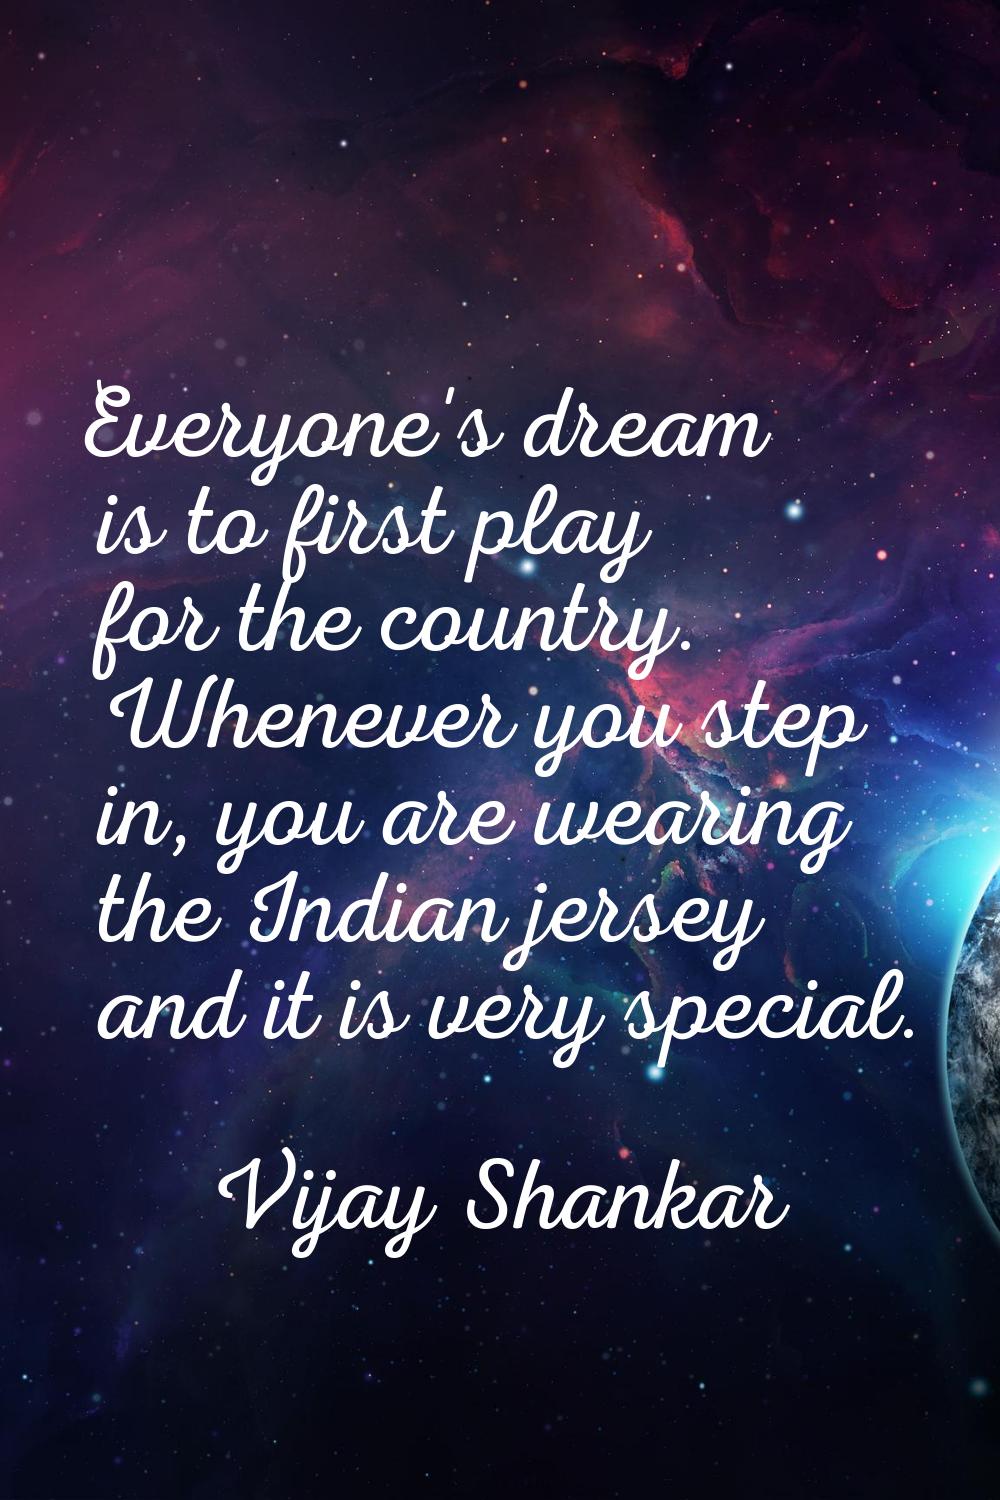 Everyone's dream is to first play for the country. Whenever you step in, you are wearing the Indian